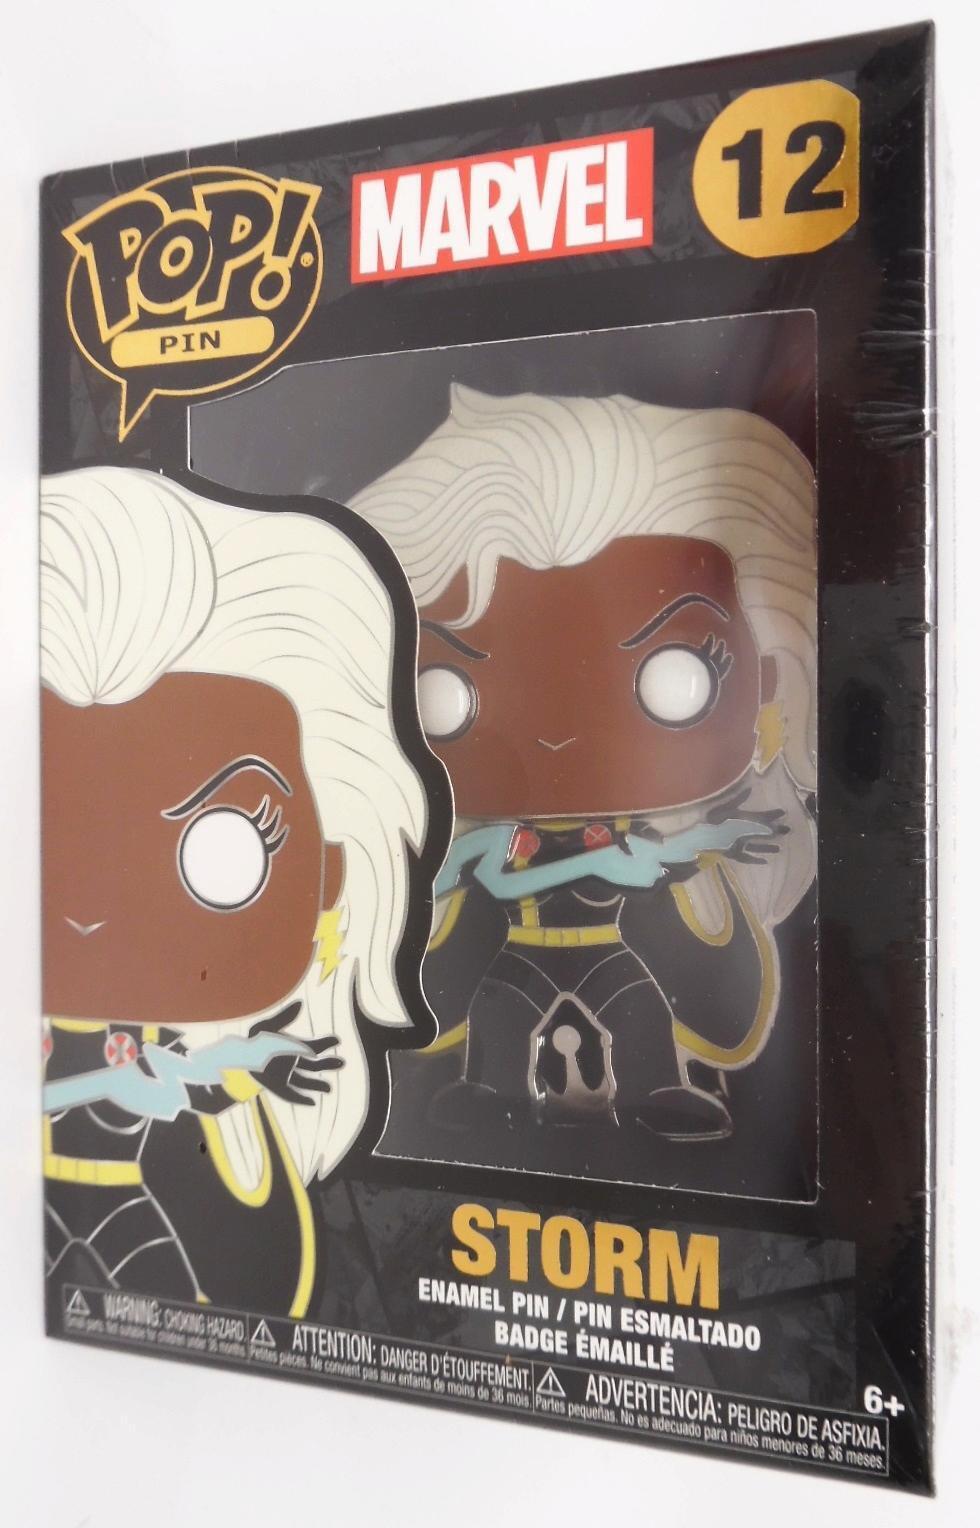 Funko POP Pin Marvel X-Men Enamel Pin with Built-in Stand 12 - Storm